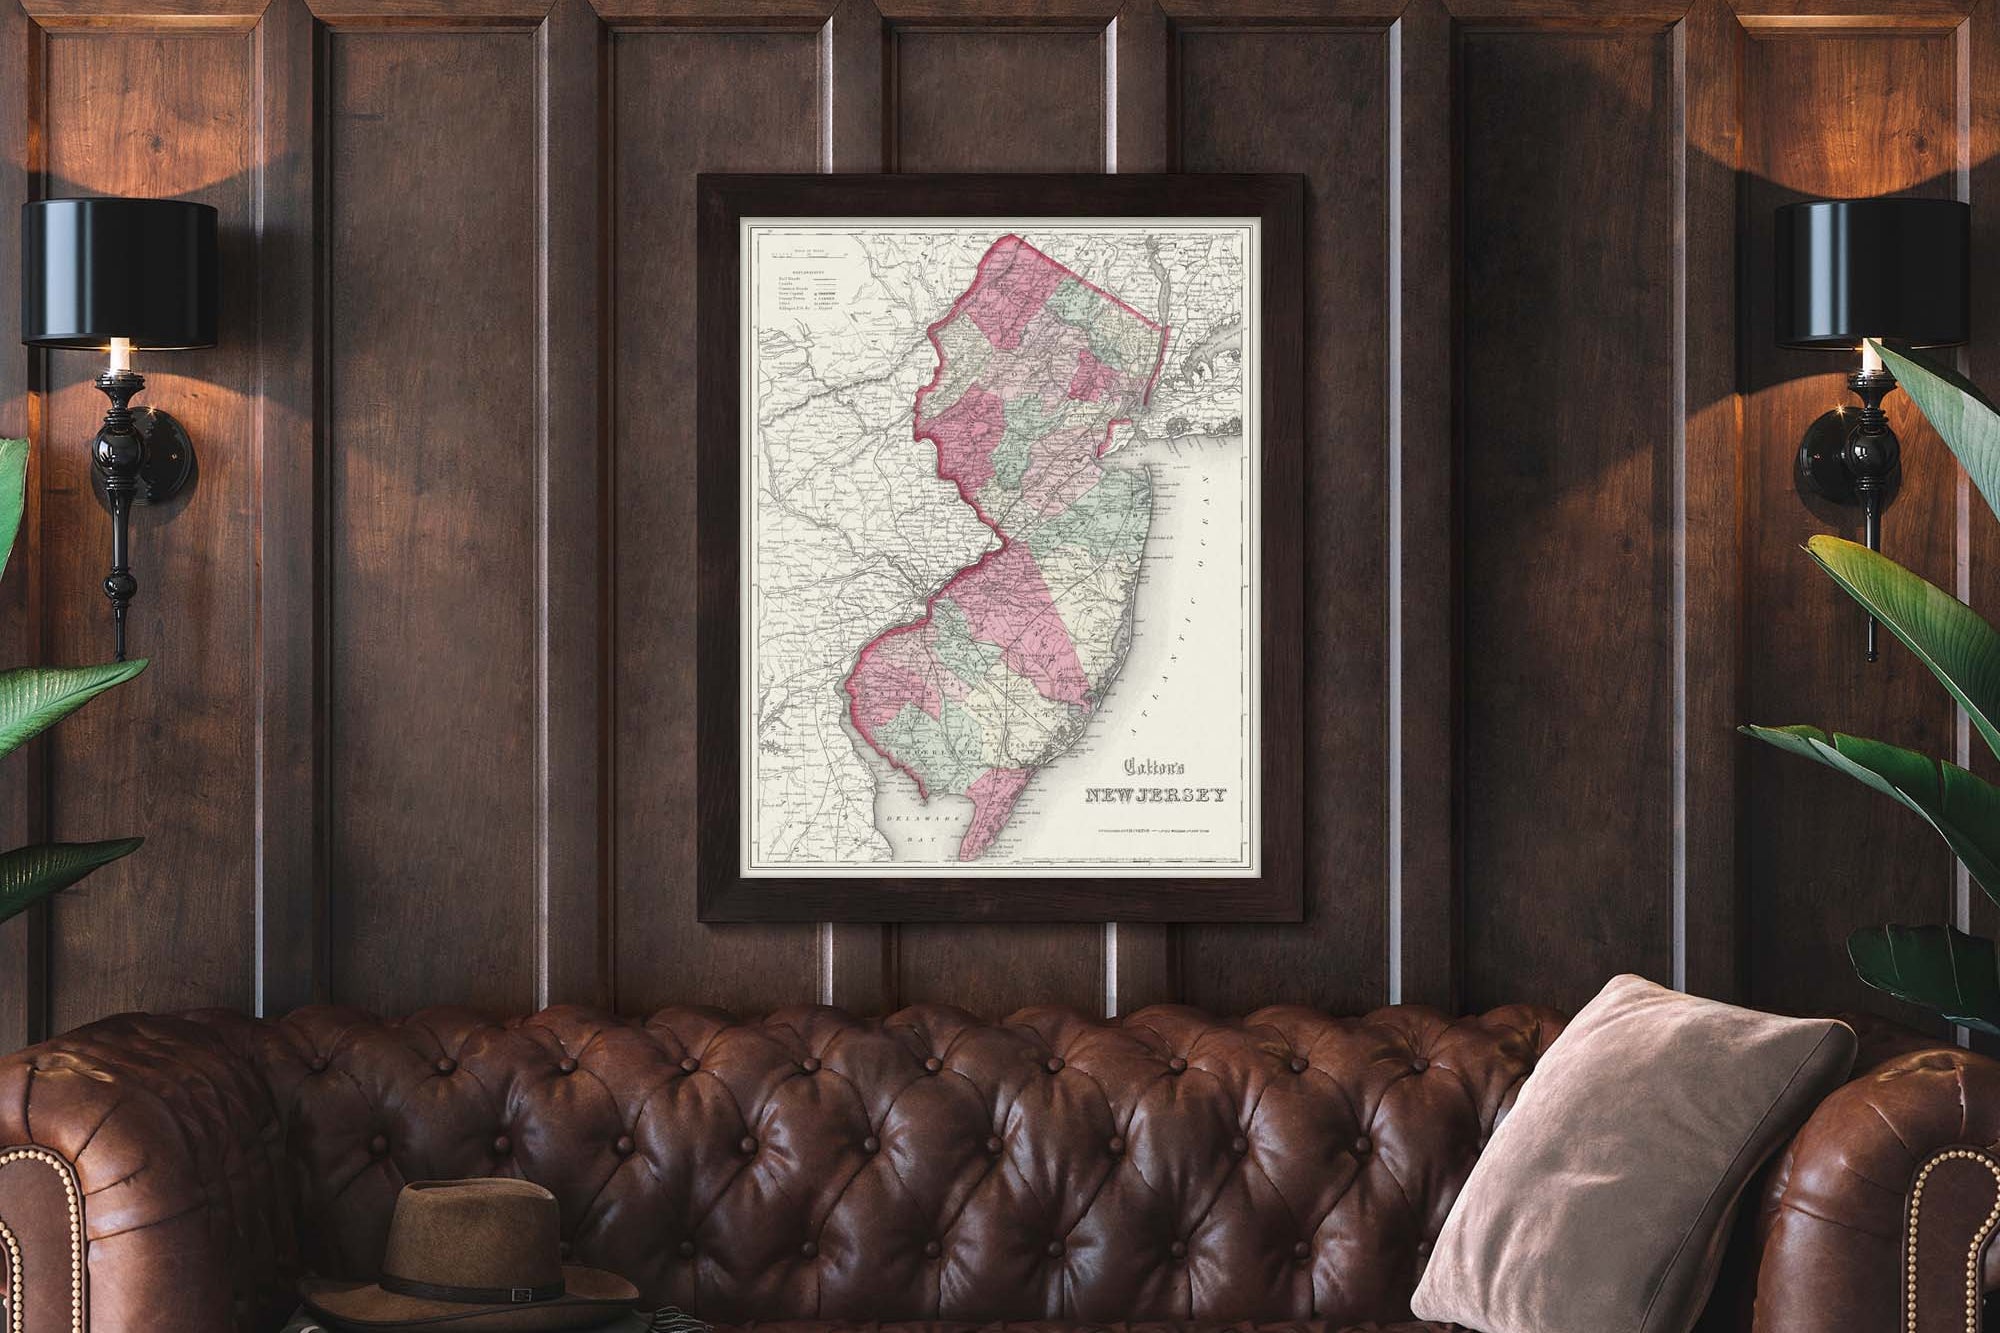 state of new jersey vintage map